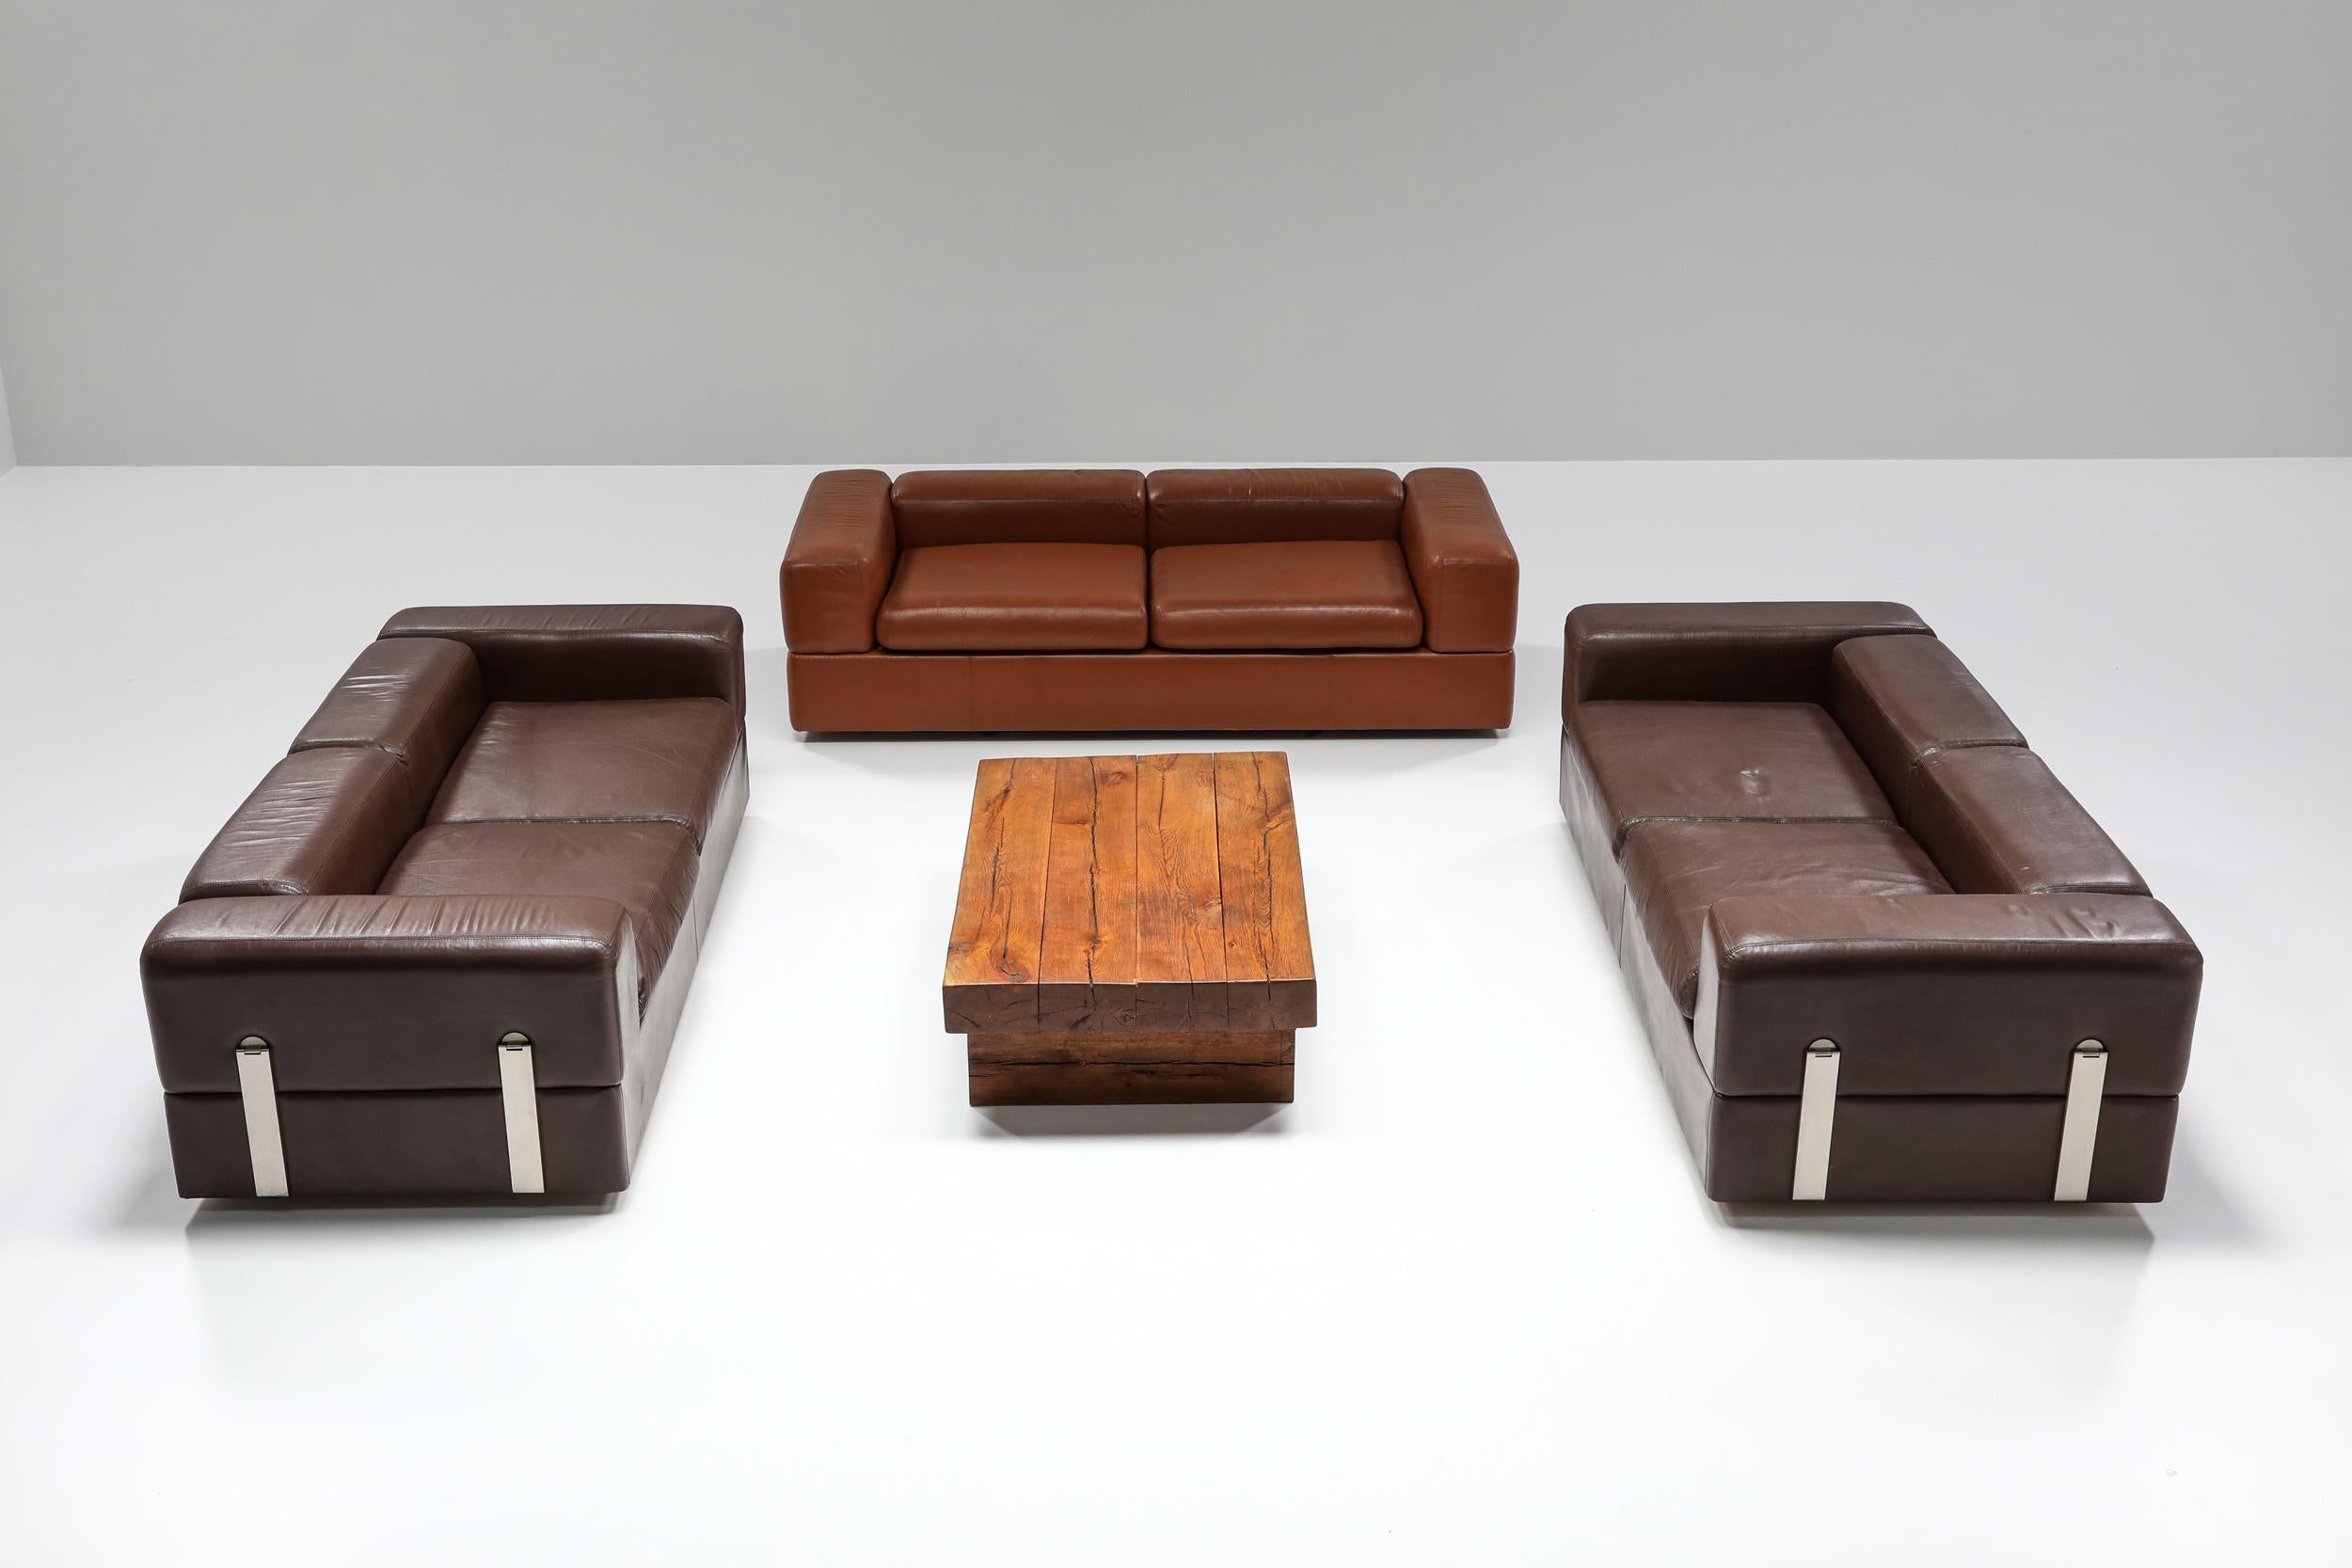 Postmodern; Space-age; Tito Agnoli for Cinova, sofa bed 711 in cognac leather, Italy, the 1960s; Italy; Italian design; 

Postmodern sofa which can be converted into a daybed, designed by Tito Agnoli and manufactured by Cinova. A truly remarkable